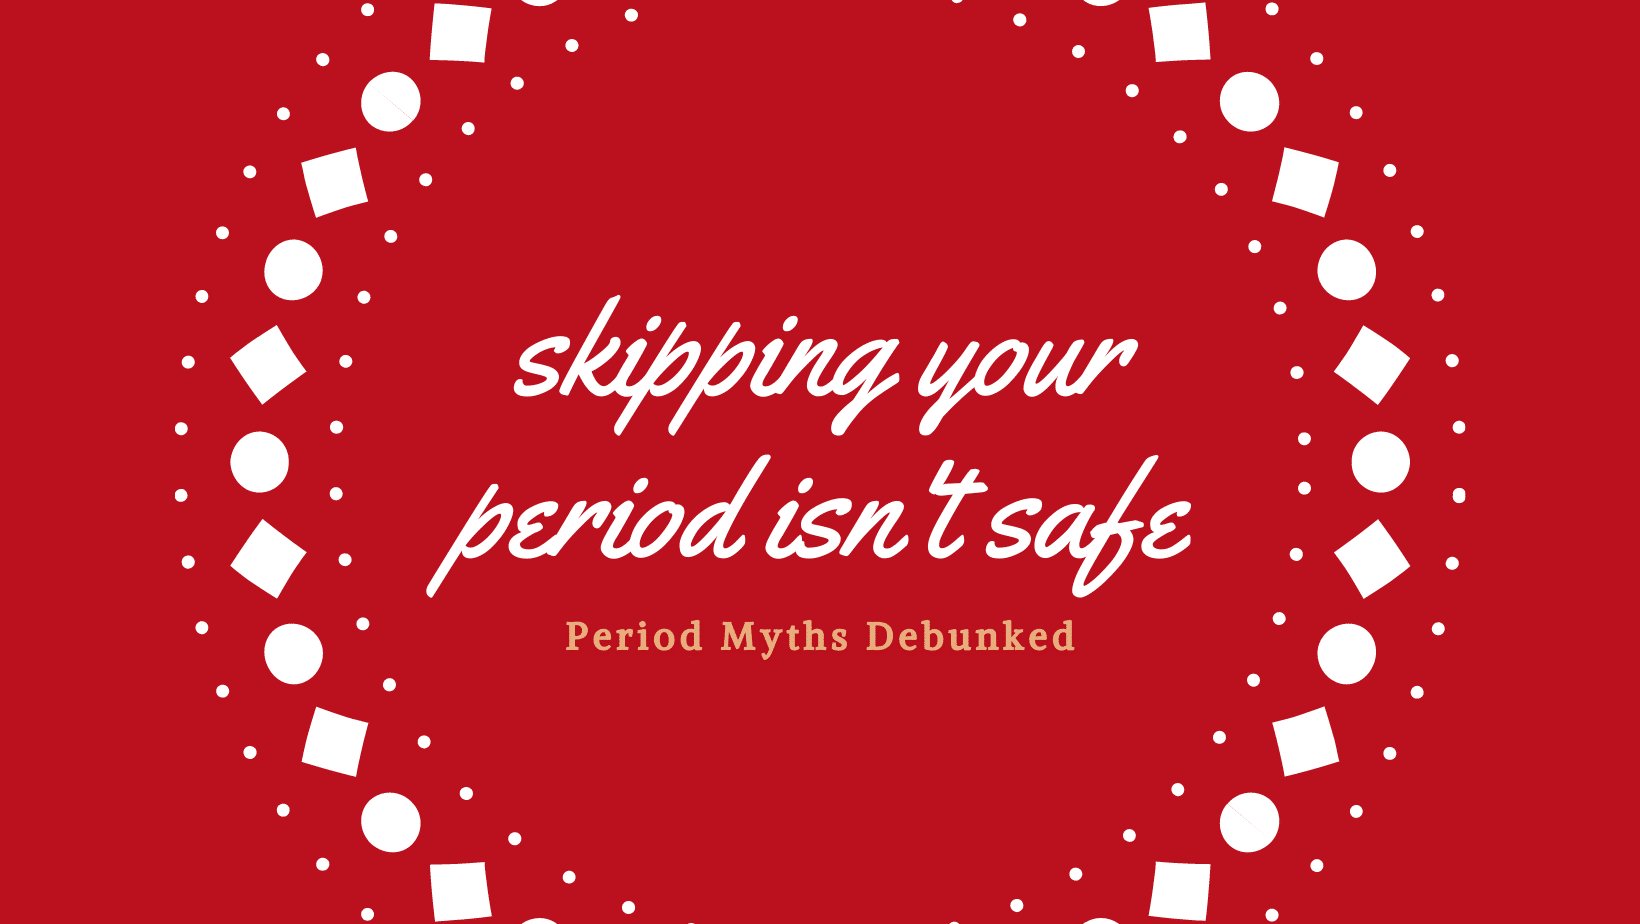 Graphic about debunking period myths that skipping your period isn't safe.